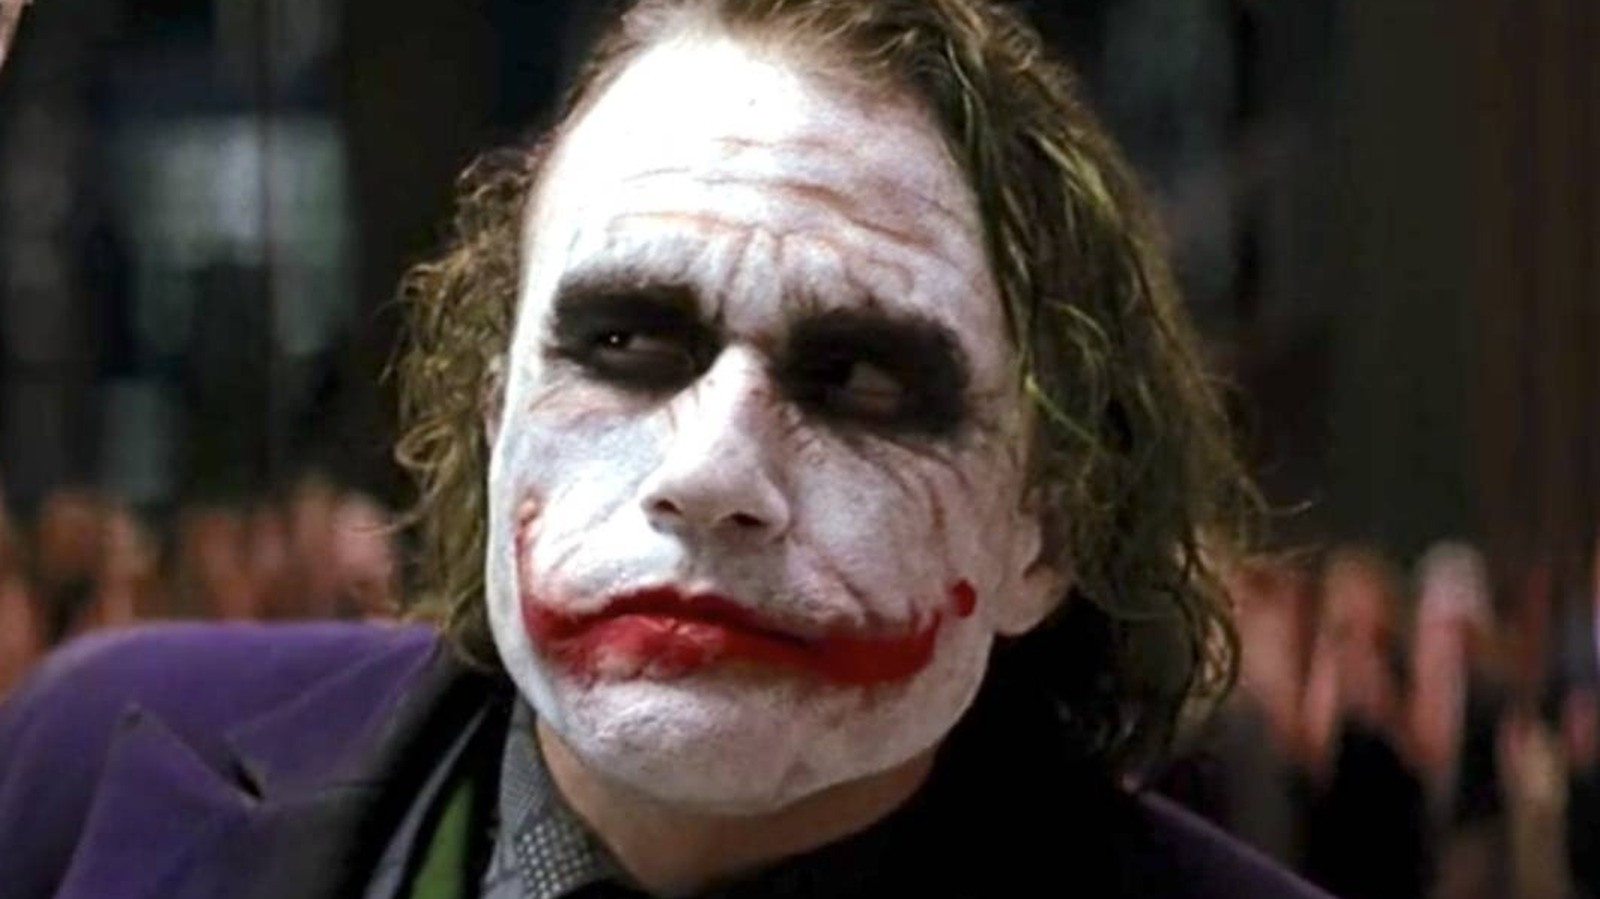 This Anime Character Is Actually Based On The Joker In The Dark Knight